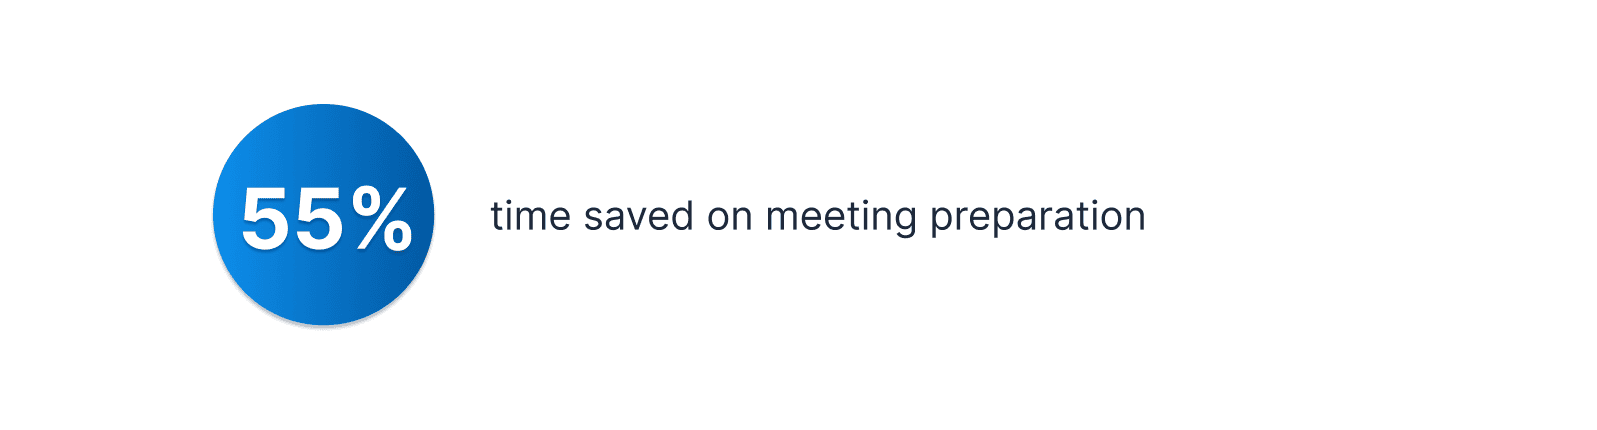 save time spent on meetings